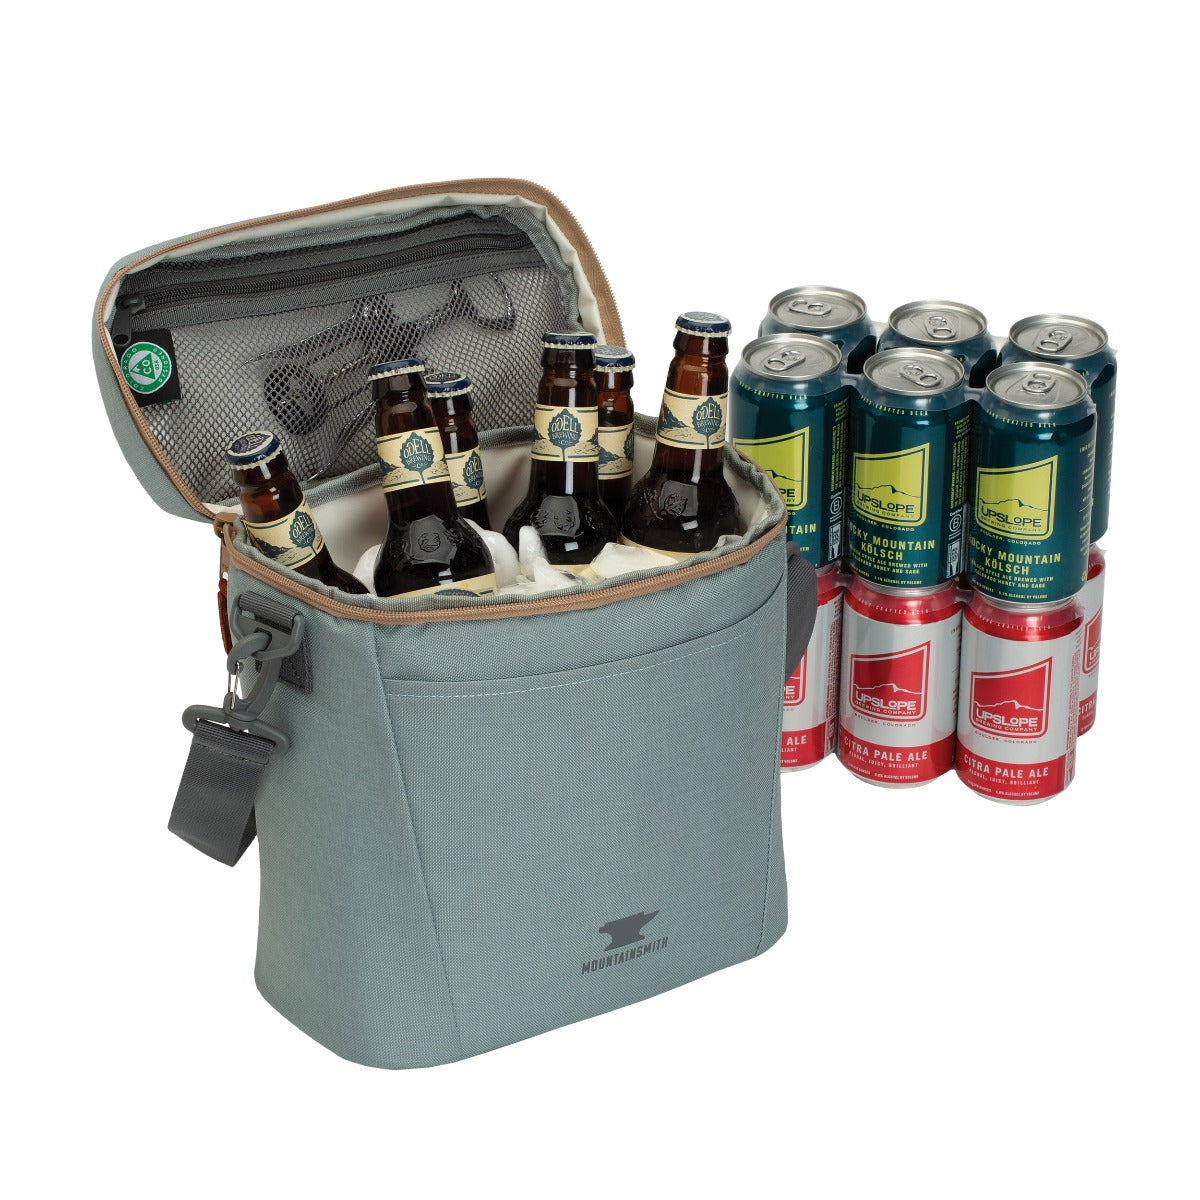 Freezer-Friendly Six-Pack Holders : Beer Can Holder